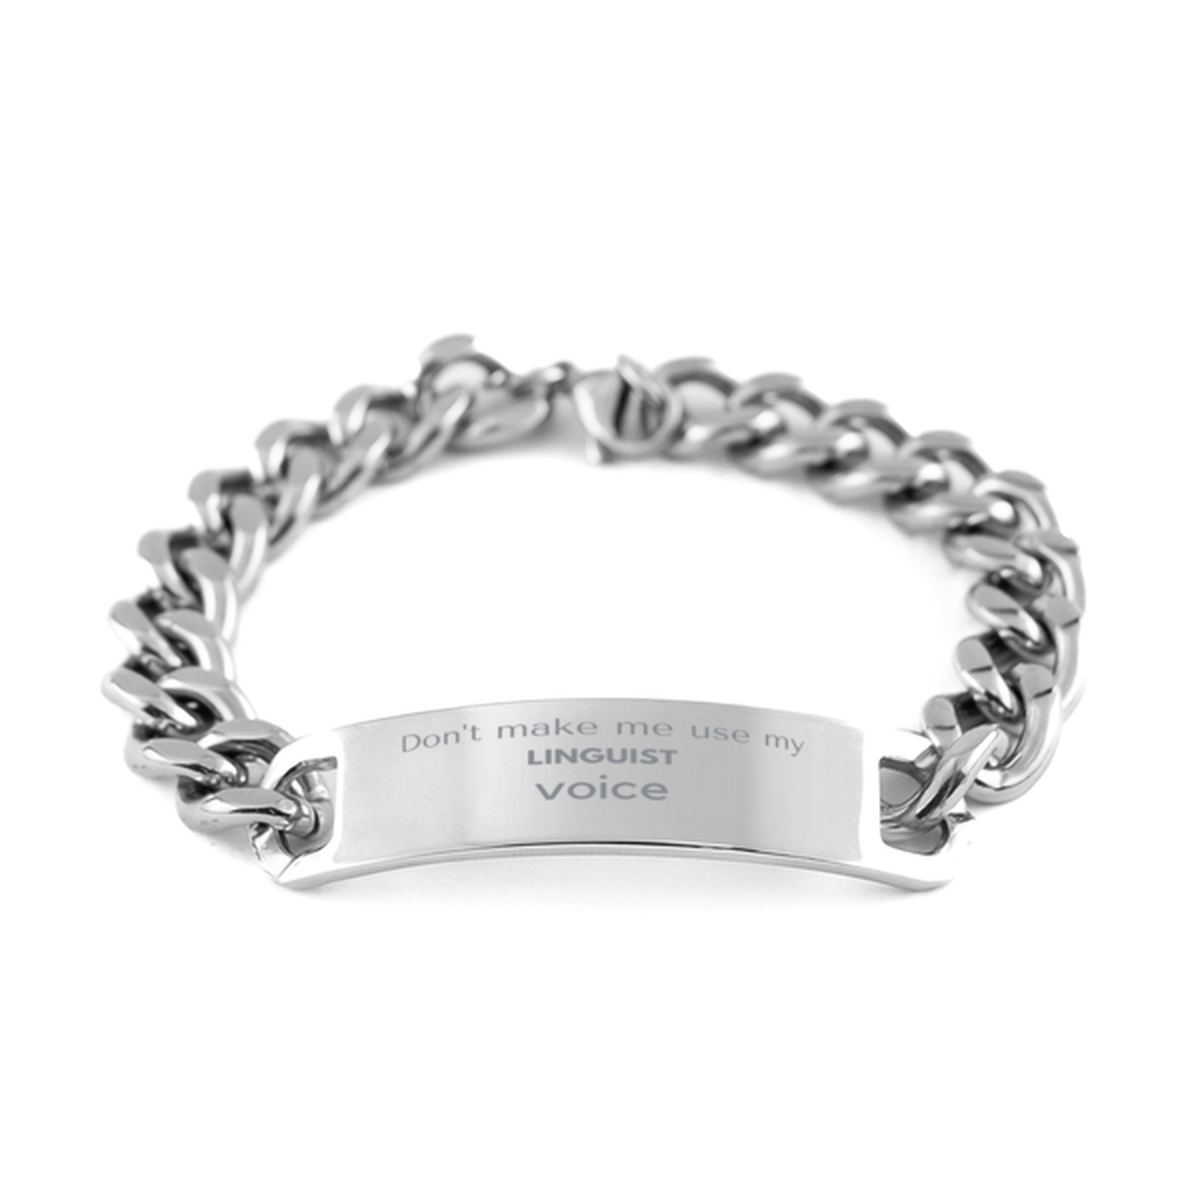 Don't make me use my Linguist voice, Sarcasm Linguist Gifts, Christmas Linguist Cuban Chain Stainless Steel Bracelet Birthday Unique Gifts For Linguist Coworkers, Men, Women, Colleague, Friends